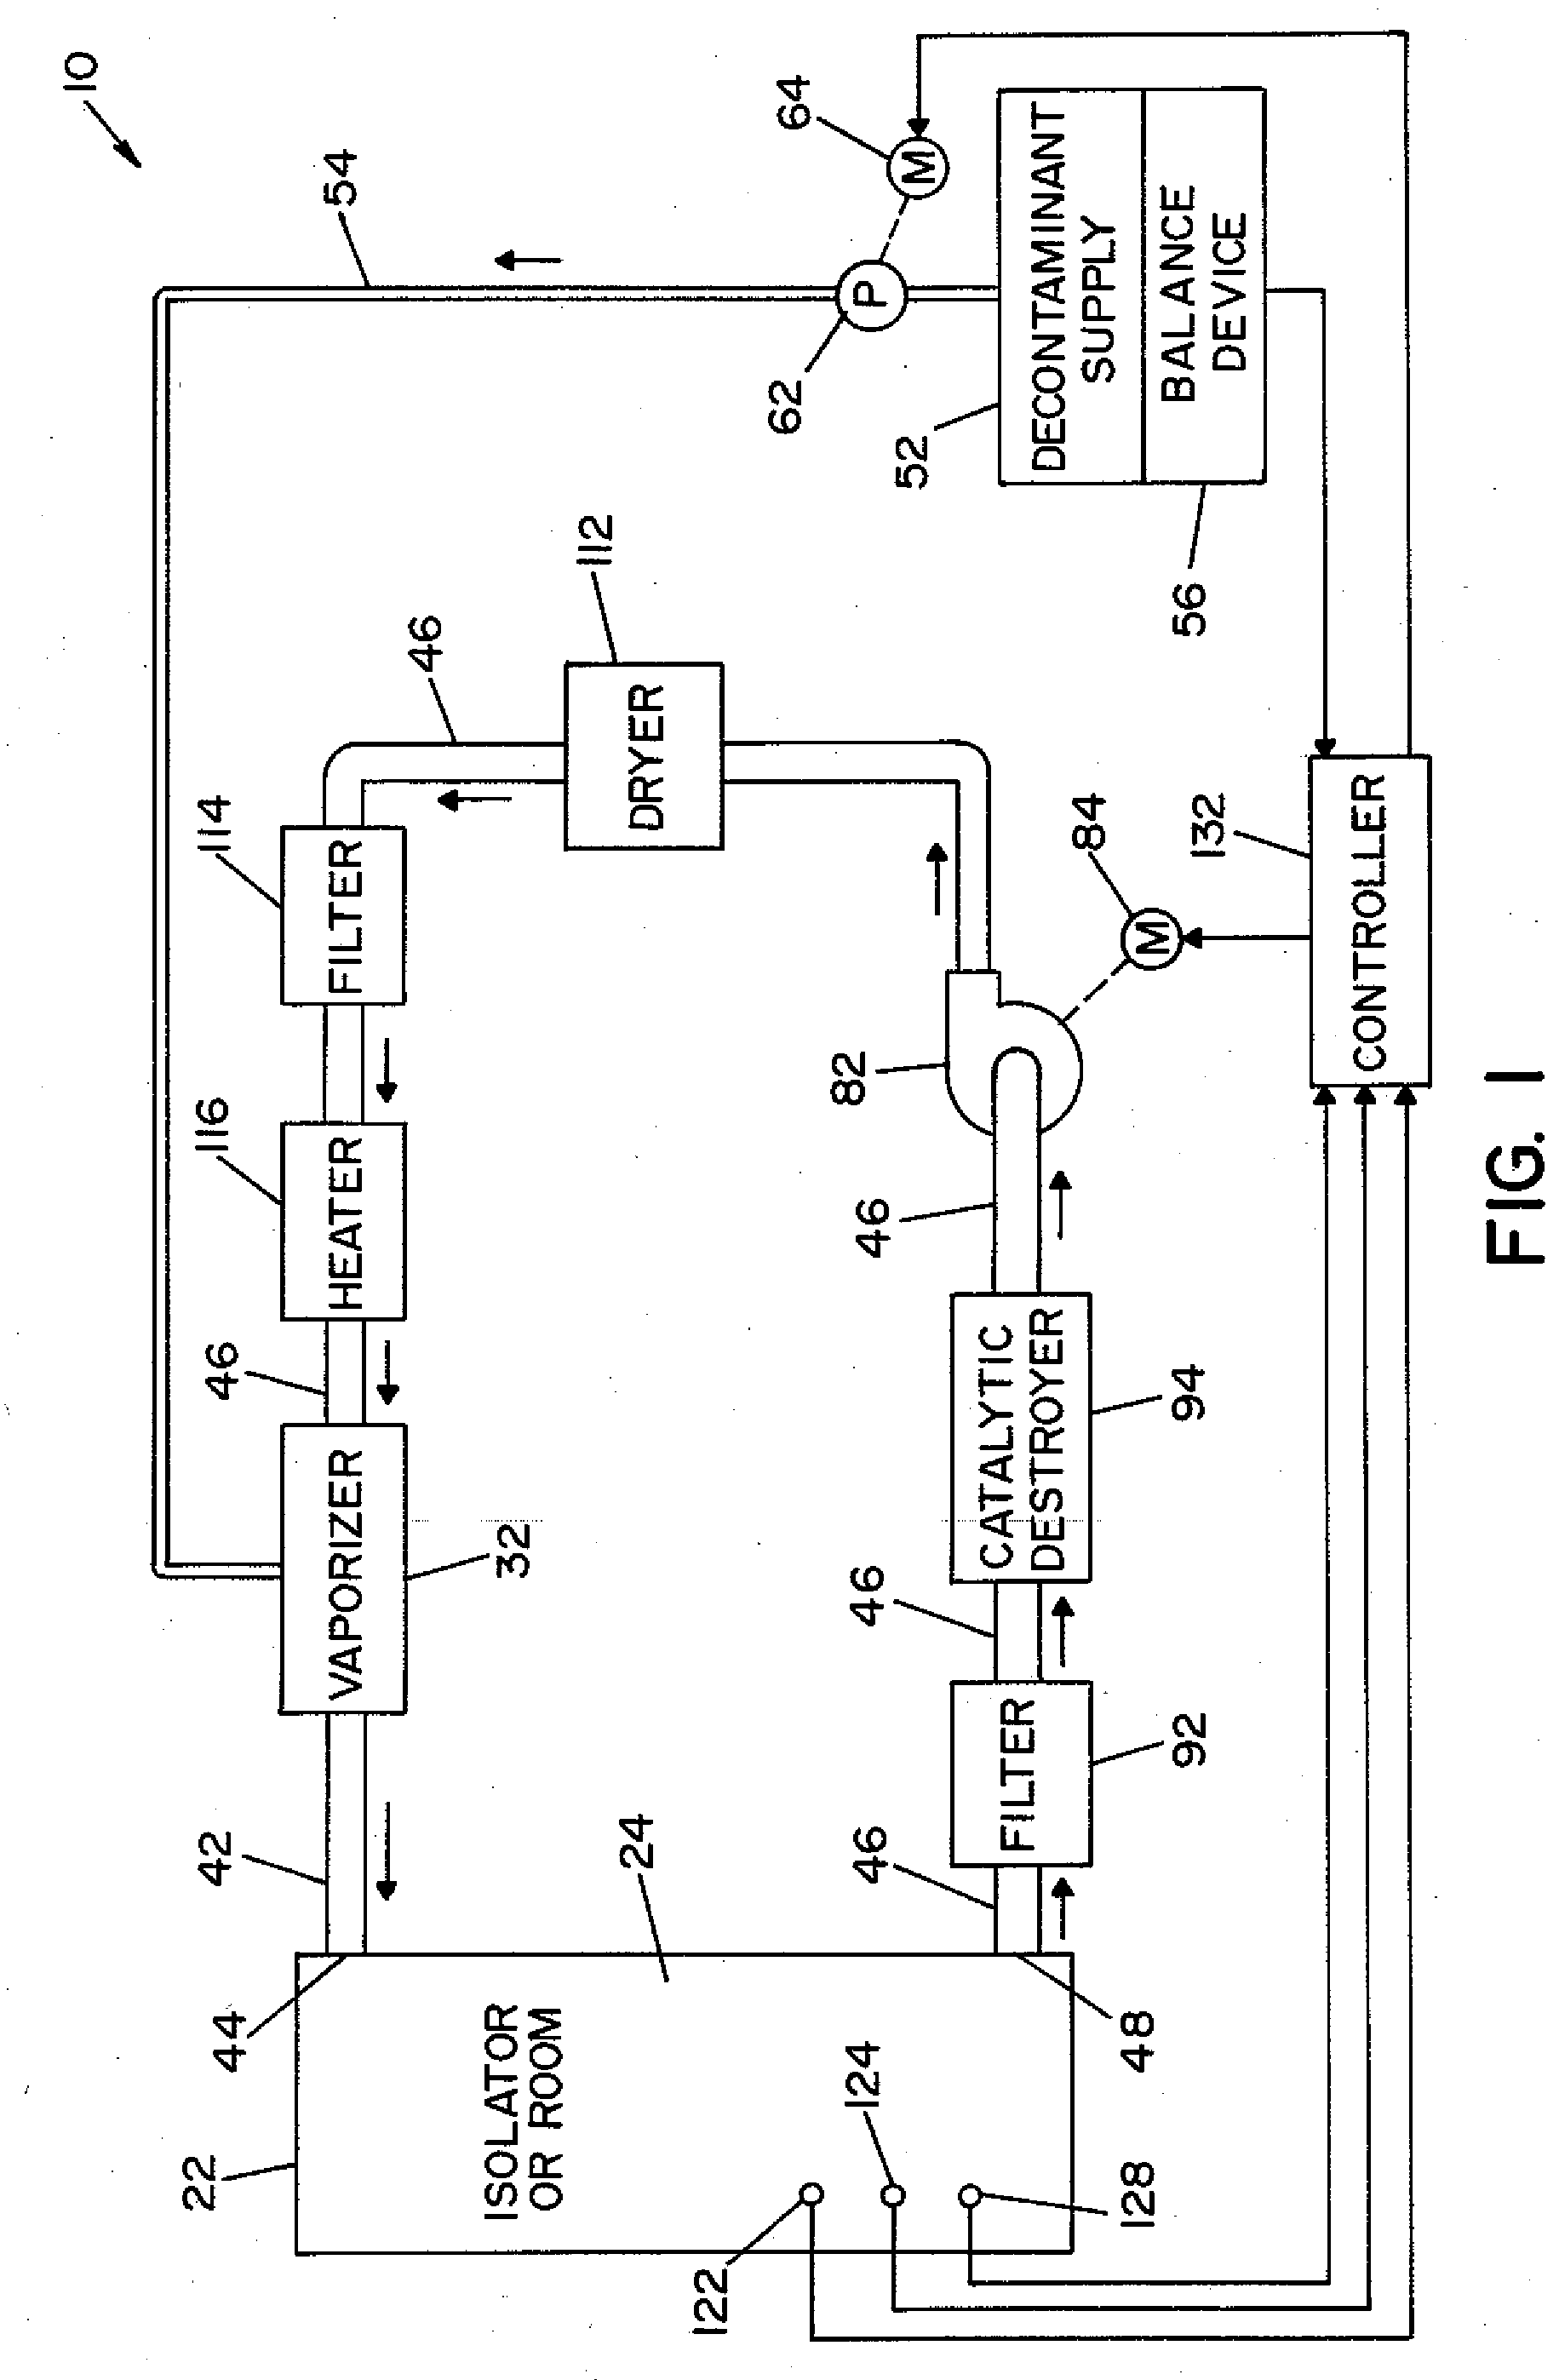 Vaporized hydrogen peroxide decontamination system with concentration adjustment mode